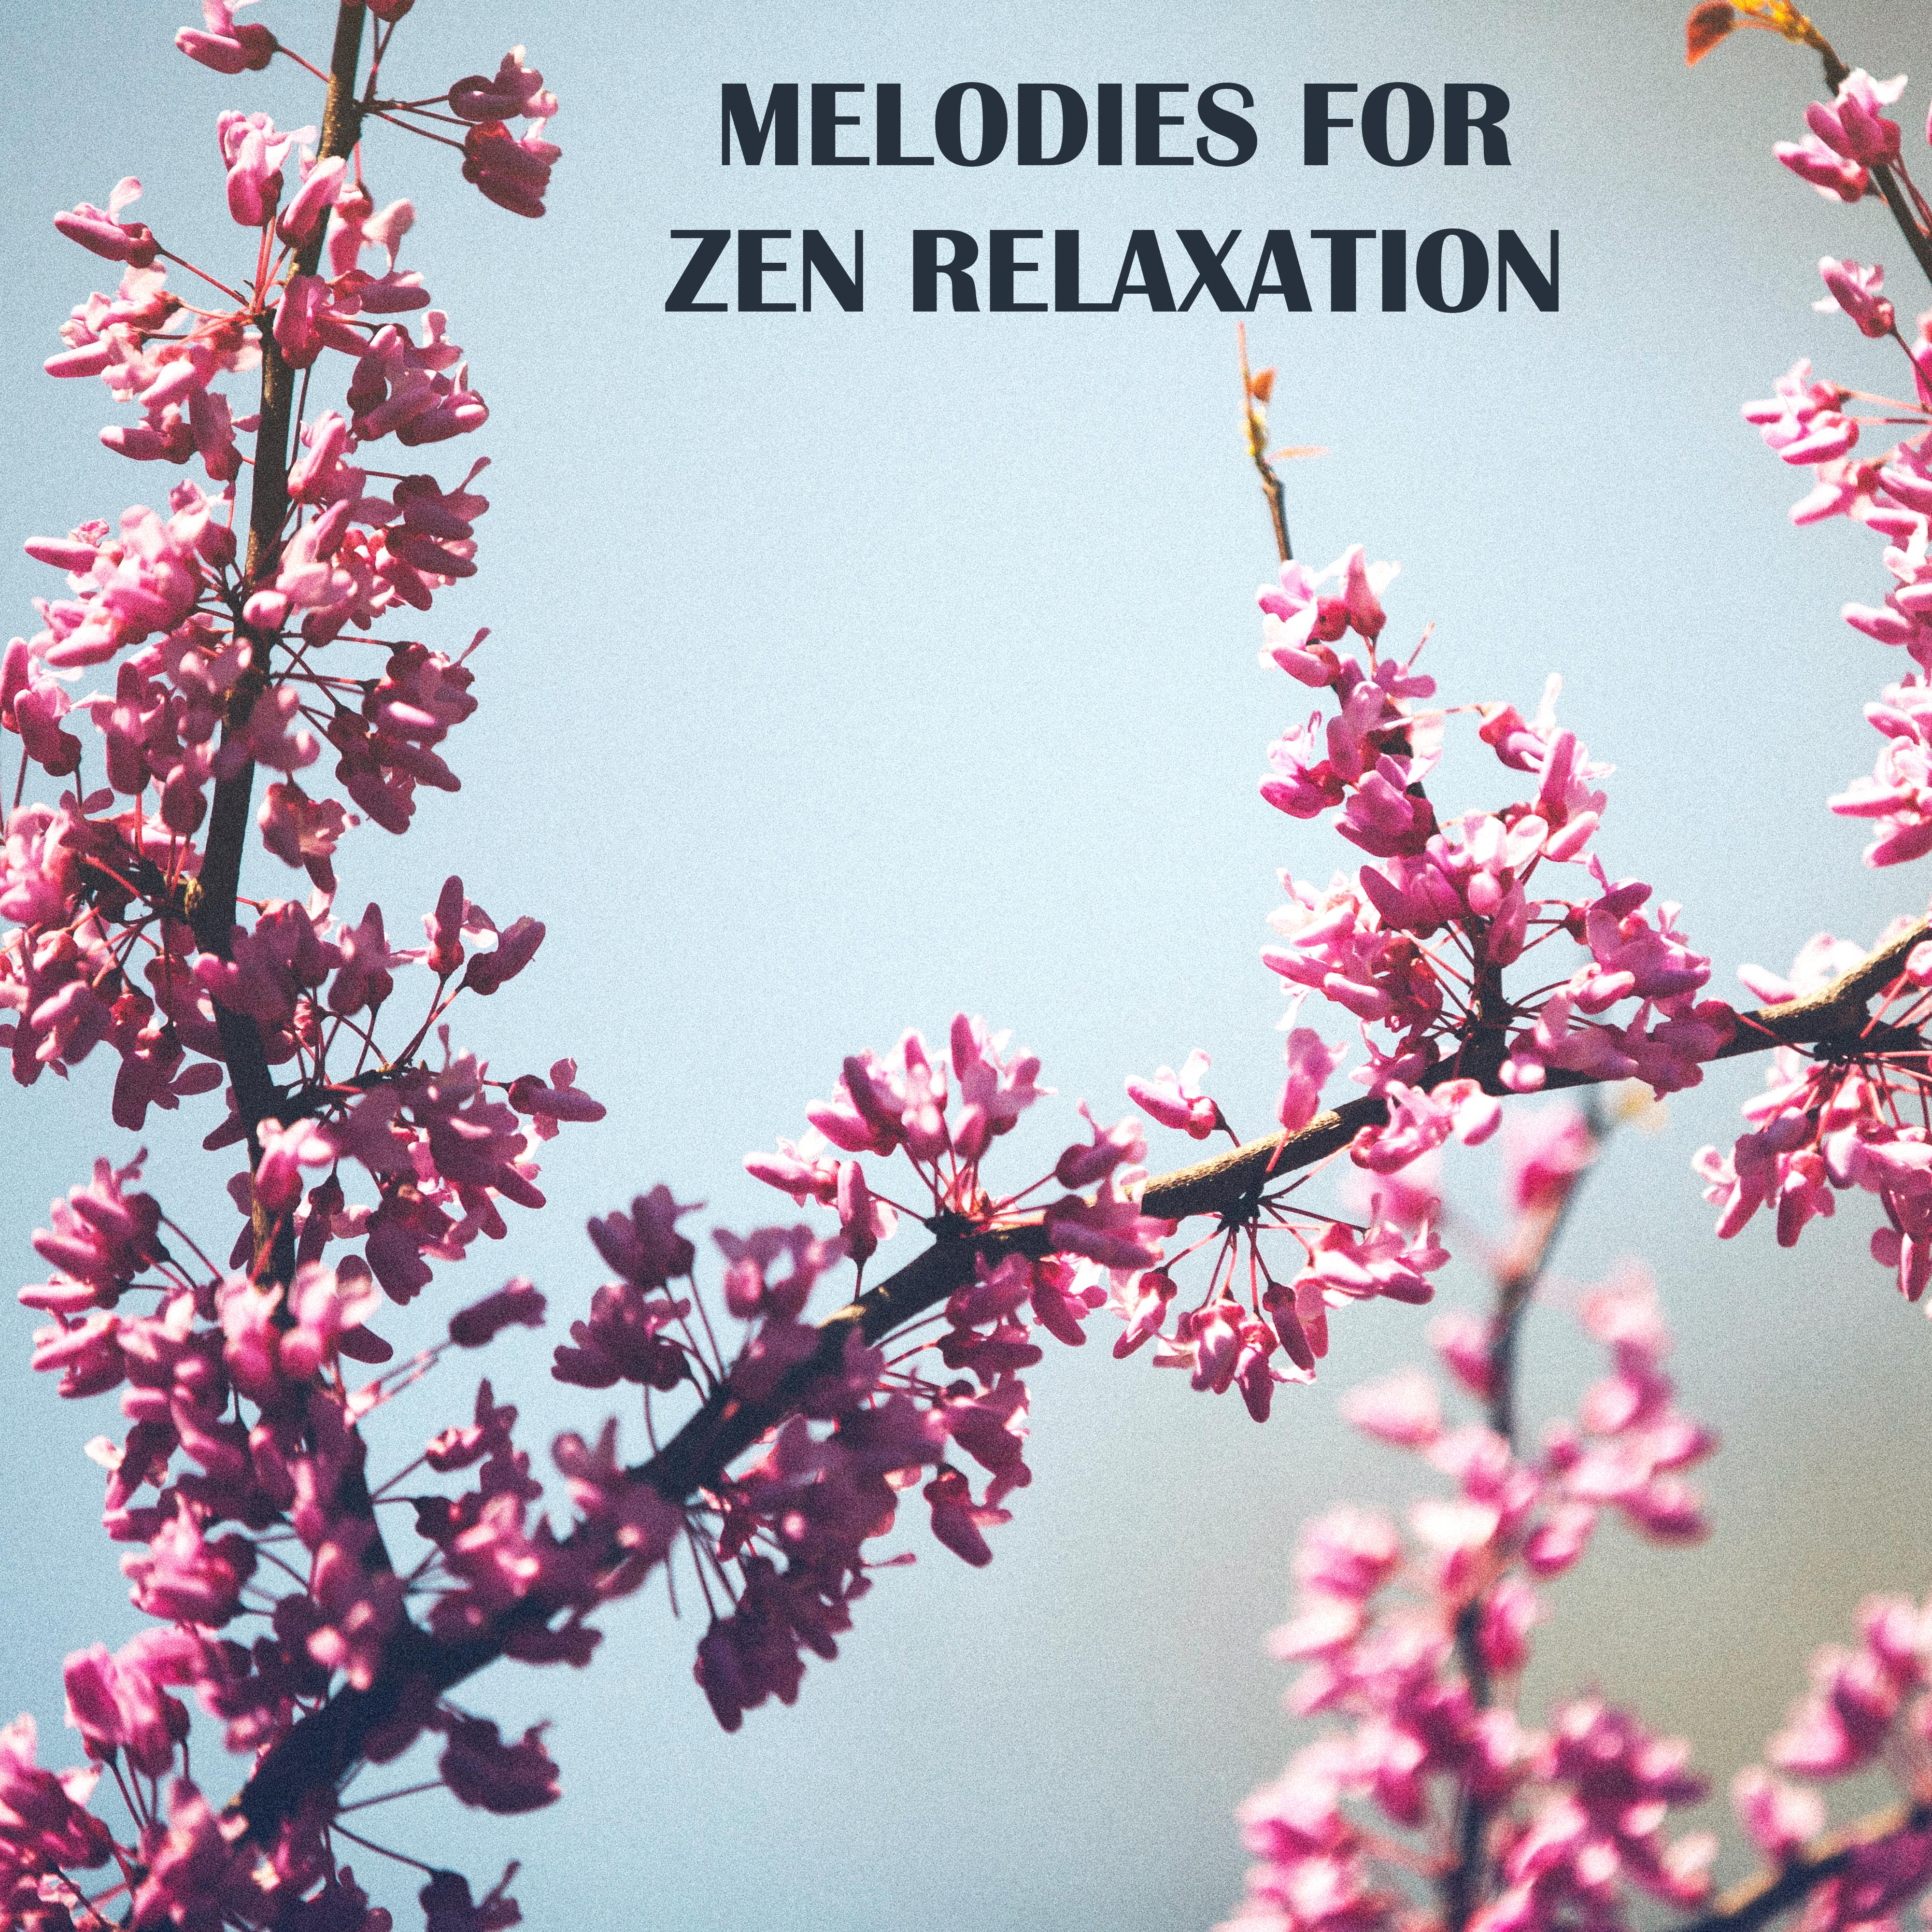 Melodies for Zen Relaxation